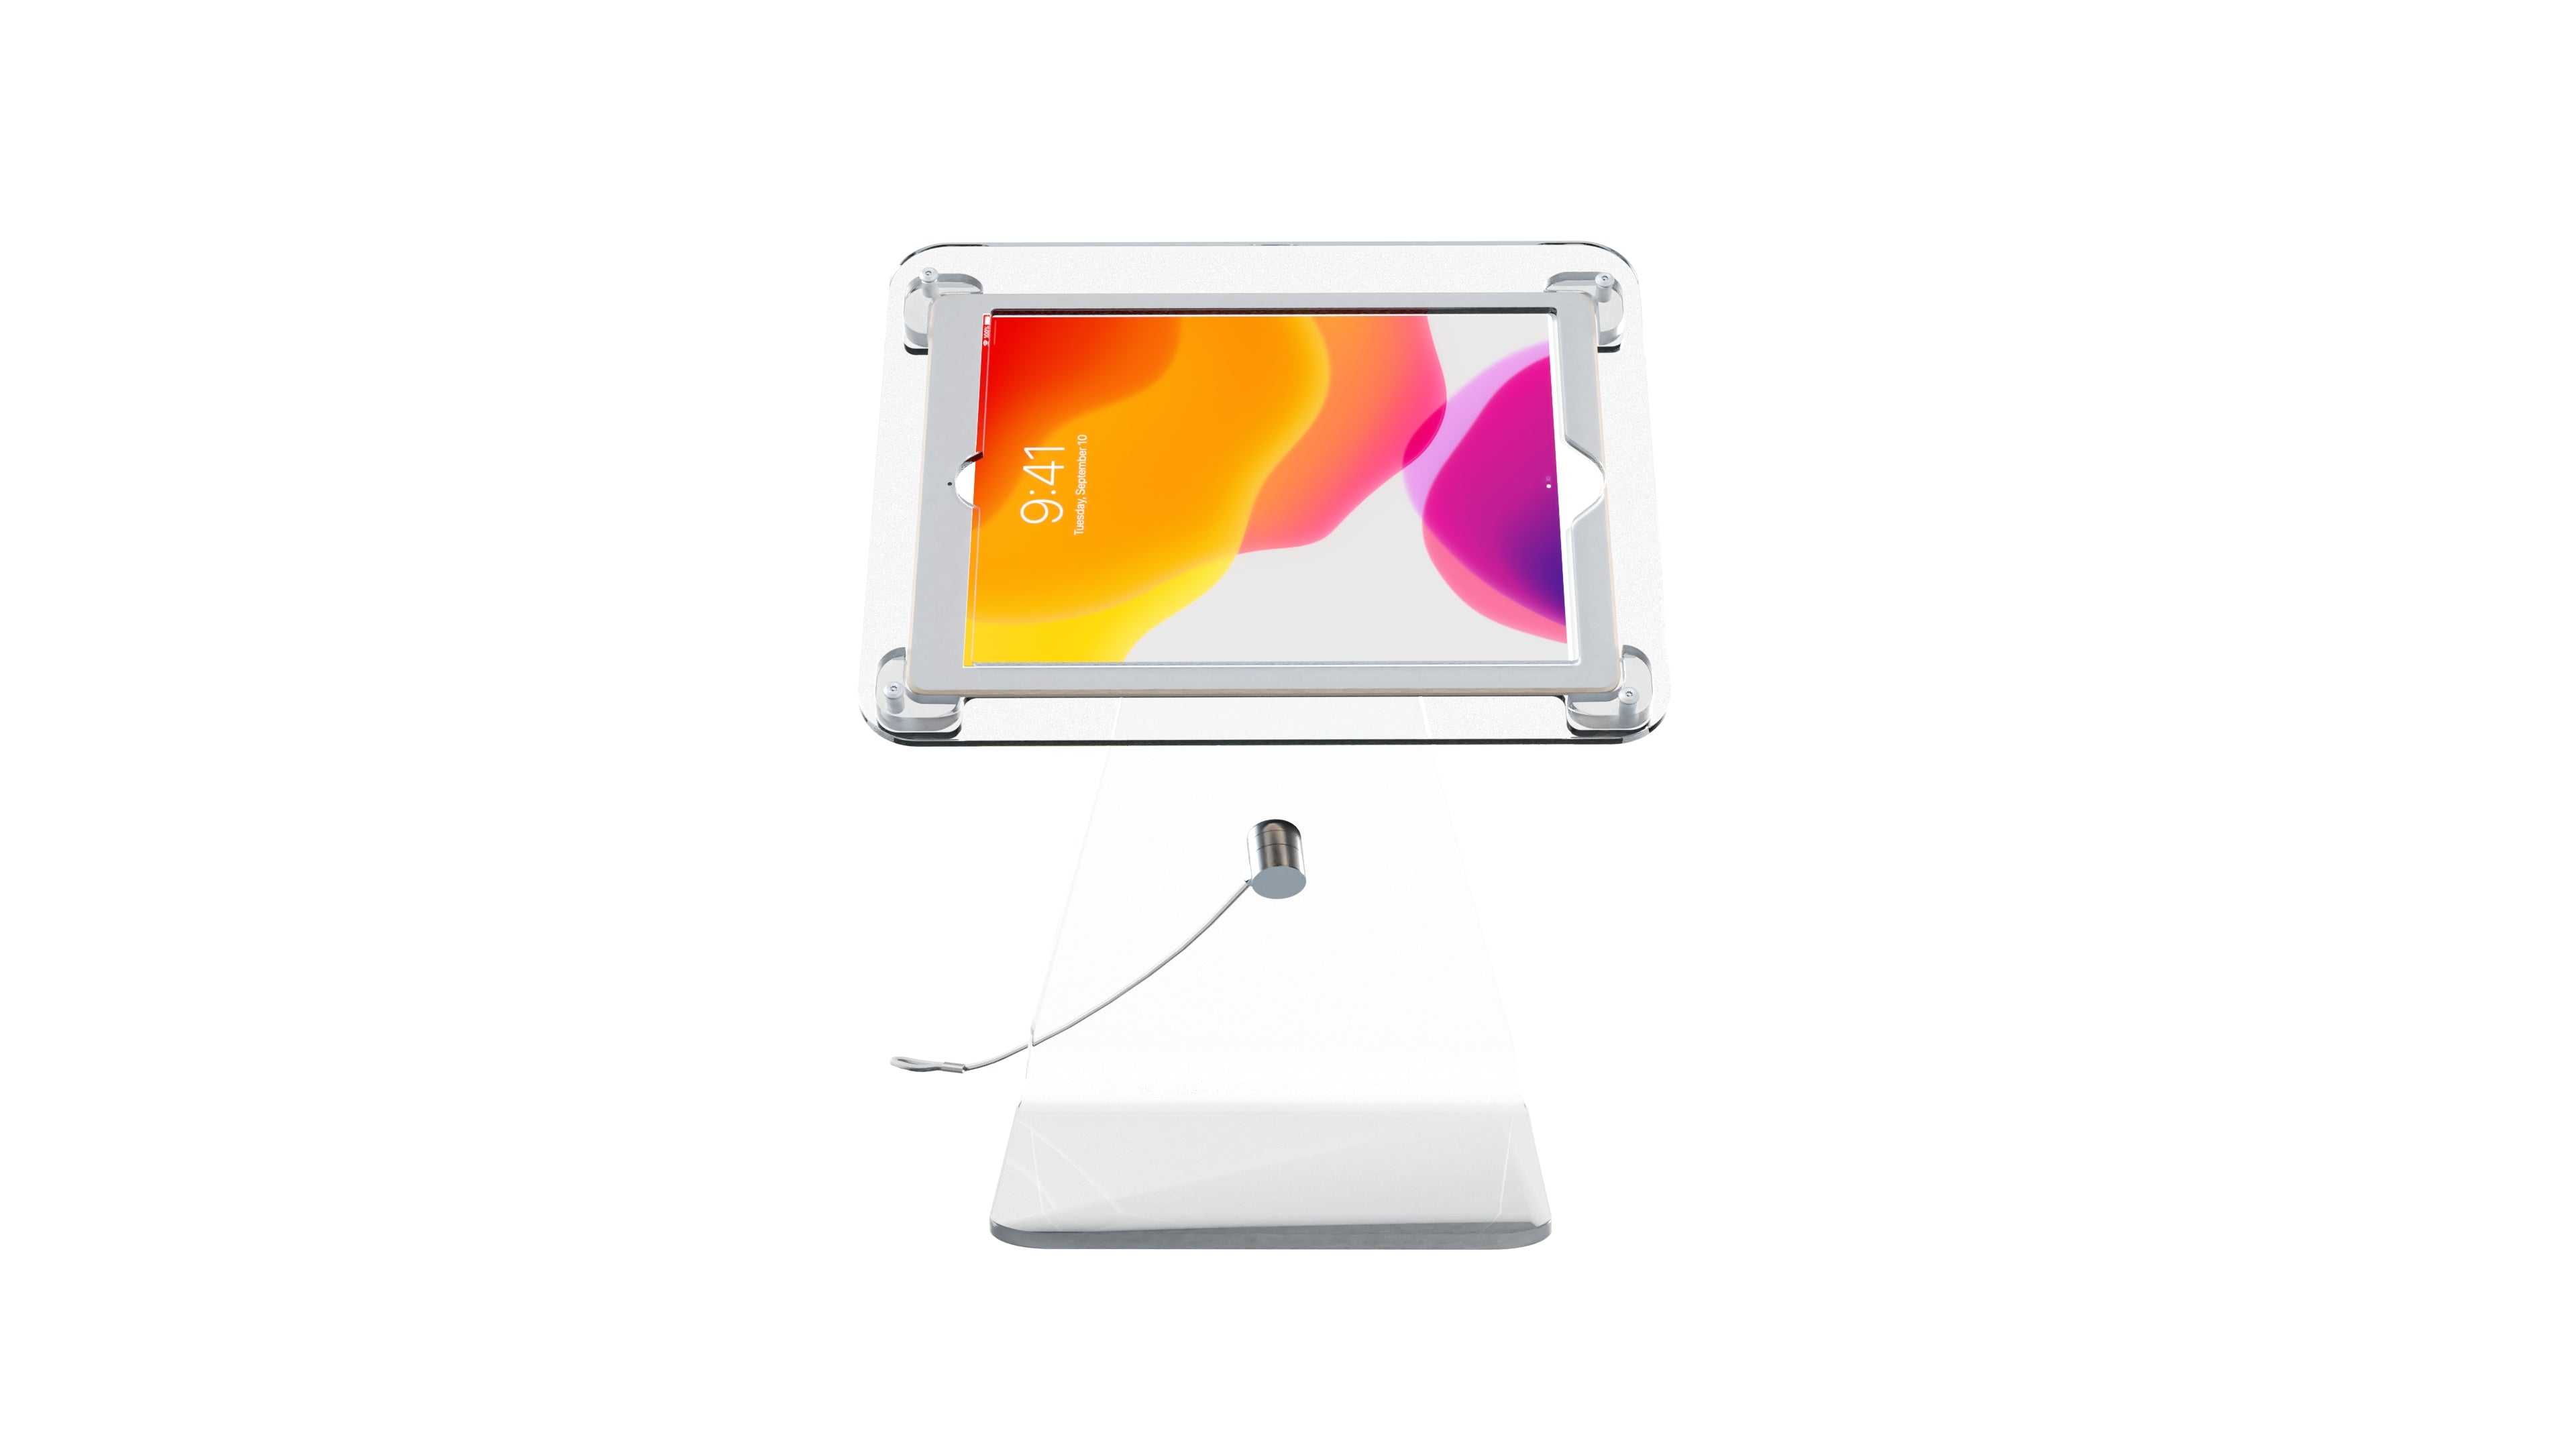 Premium Security Translucent Acrylic Kiosk for 10.2-inch iPad (7th/ 8th/ 9th Gen) & More